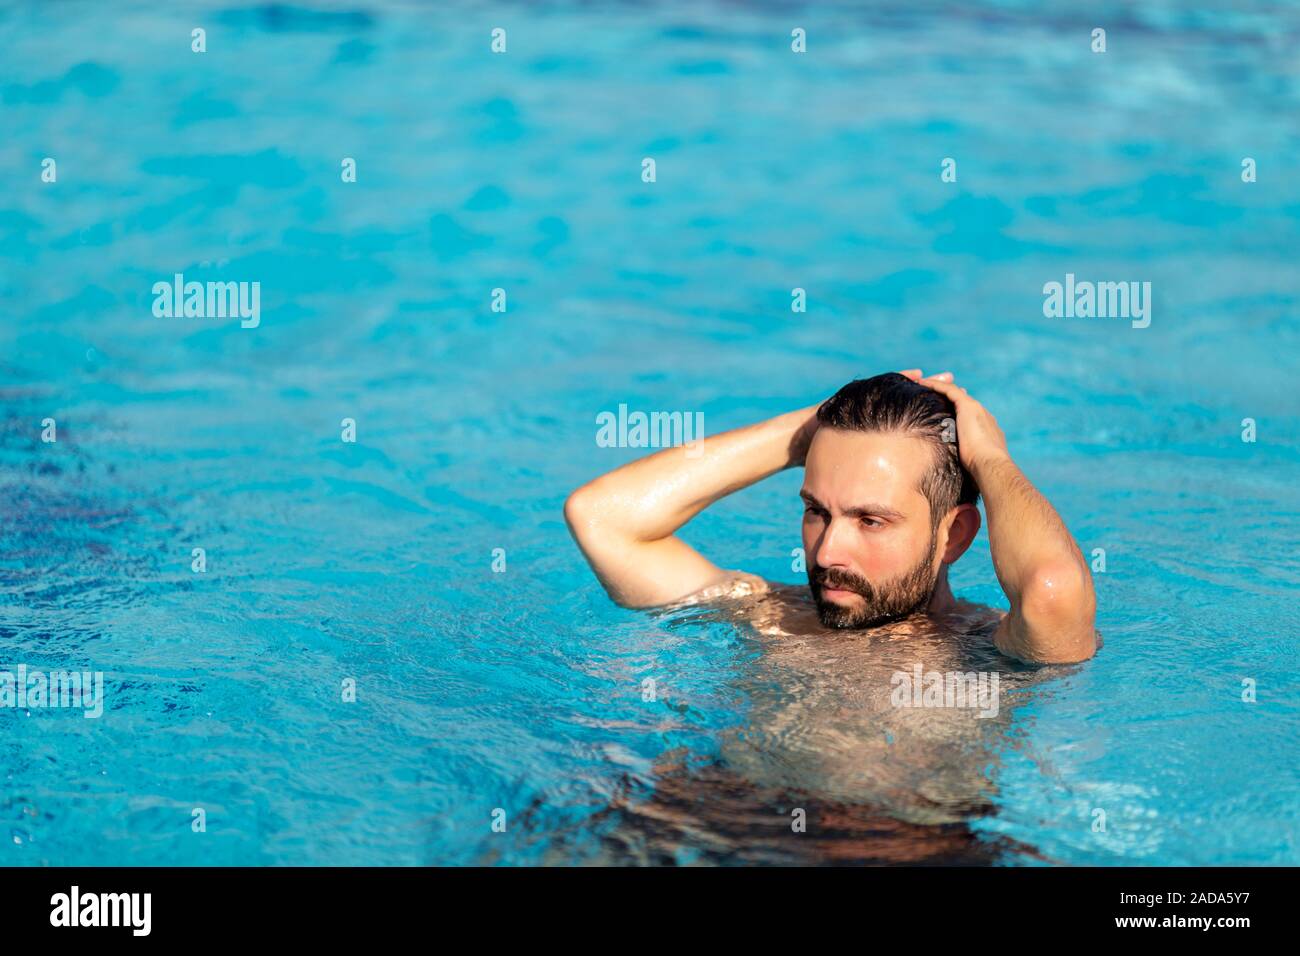 man is swimming in the swimming pool with spray on the face with dramatic effect. Rest, travel concept. Stock Photo